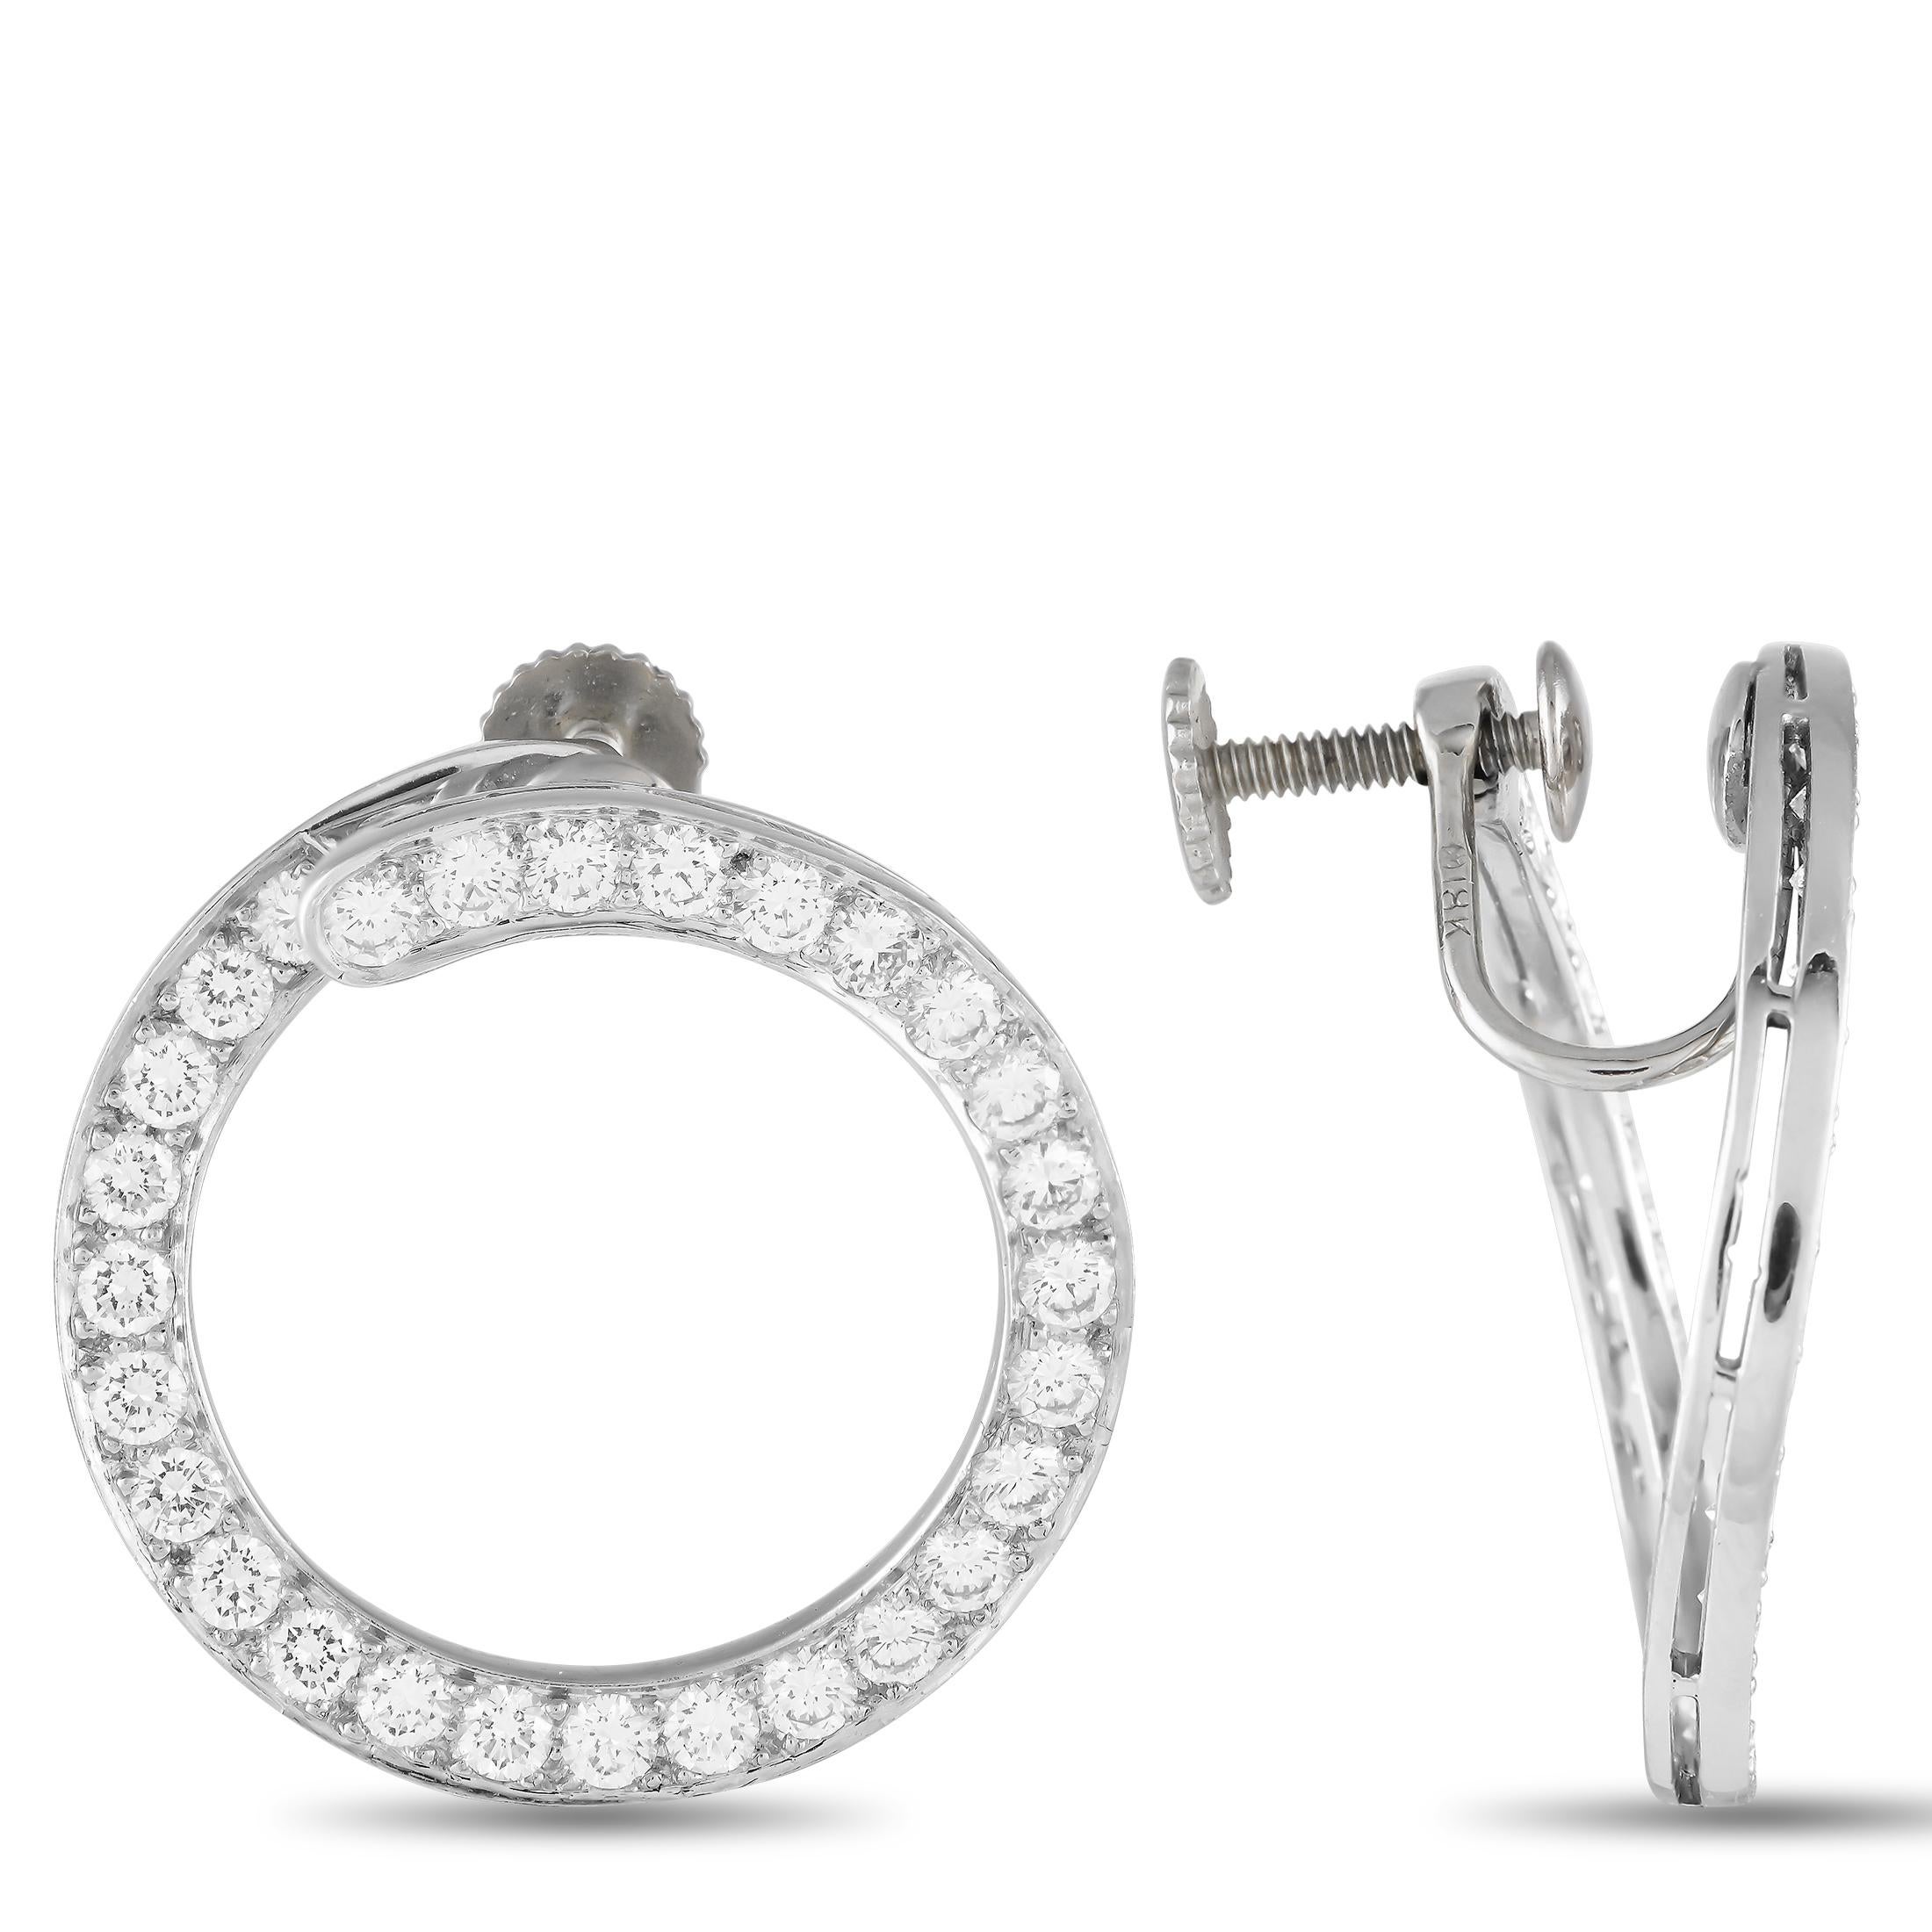 These earrings are the perfect special occasion hoops. They feature a unique front-to-back design where the circular shape faces forward instead of the usual hoops that hang sideways. A flurry of diamonds traces each platinum hoop, delivering a